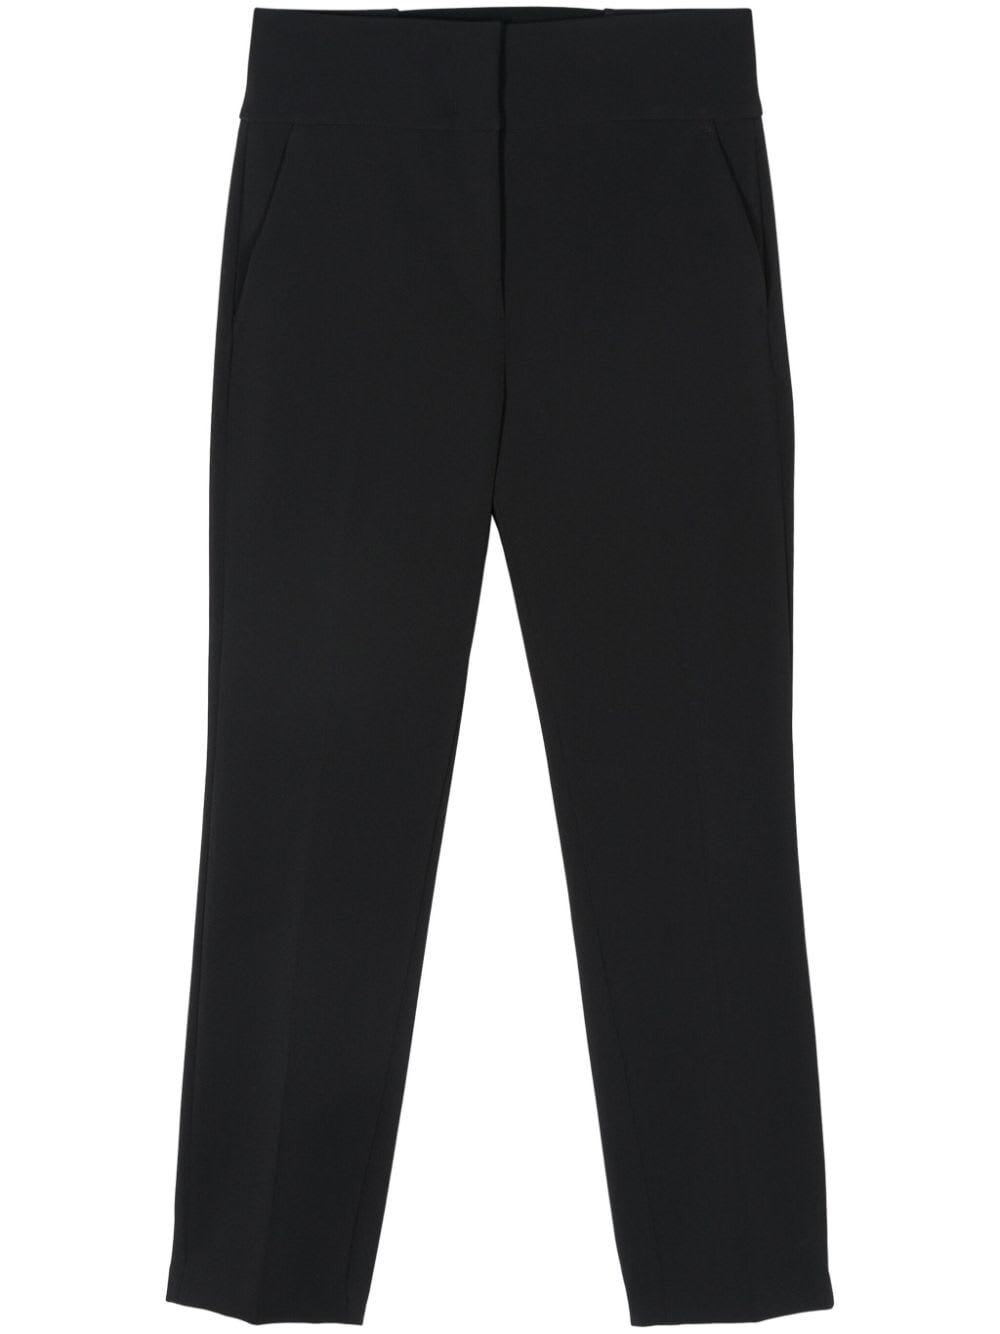 Regular Crepe Stretch Trousers